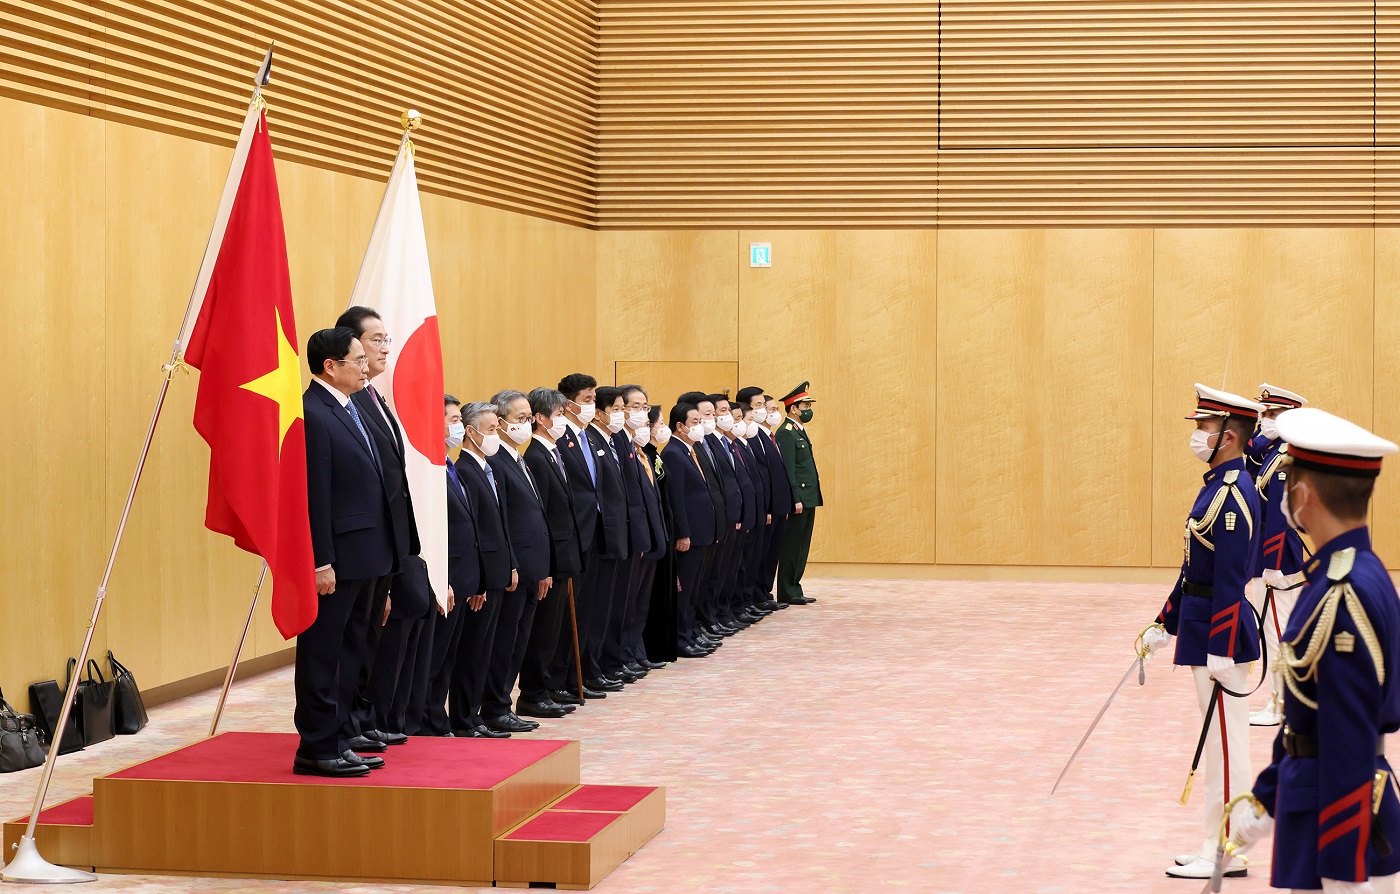 Photograph of a salute and the guard of honor ceremony (7)